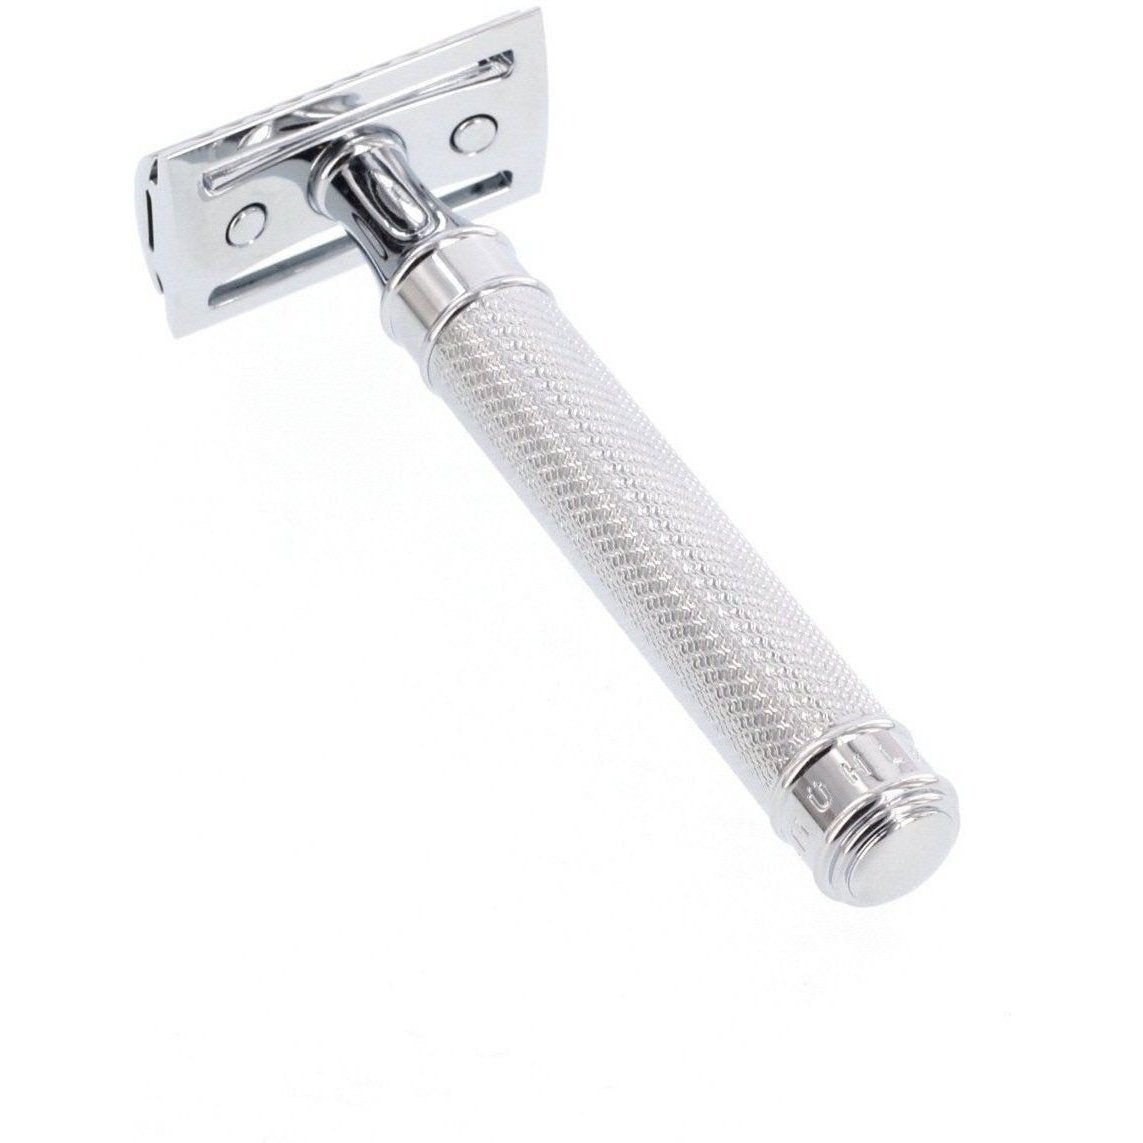 A stainless steel KirbyAllison.com R89 Closed Comb Safety Razor on a white background.